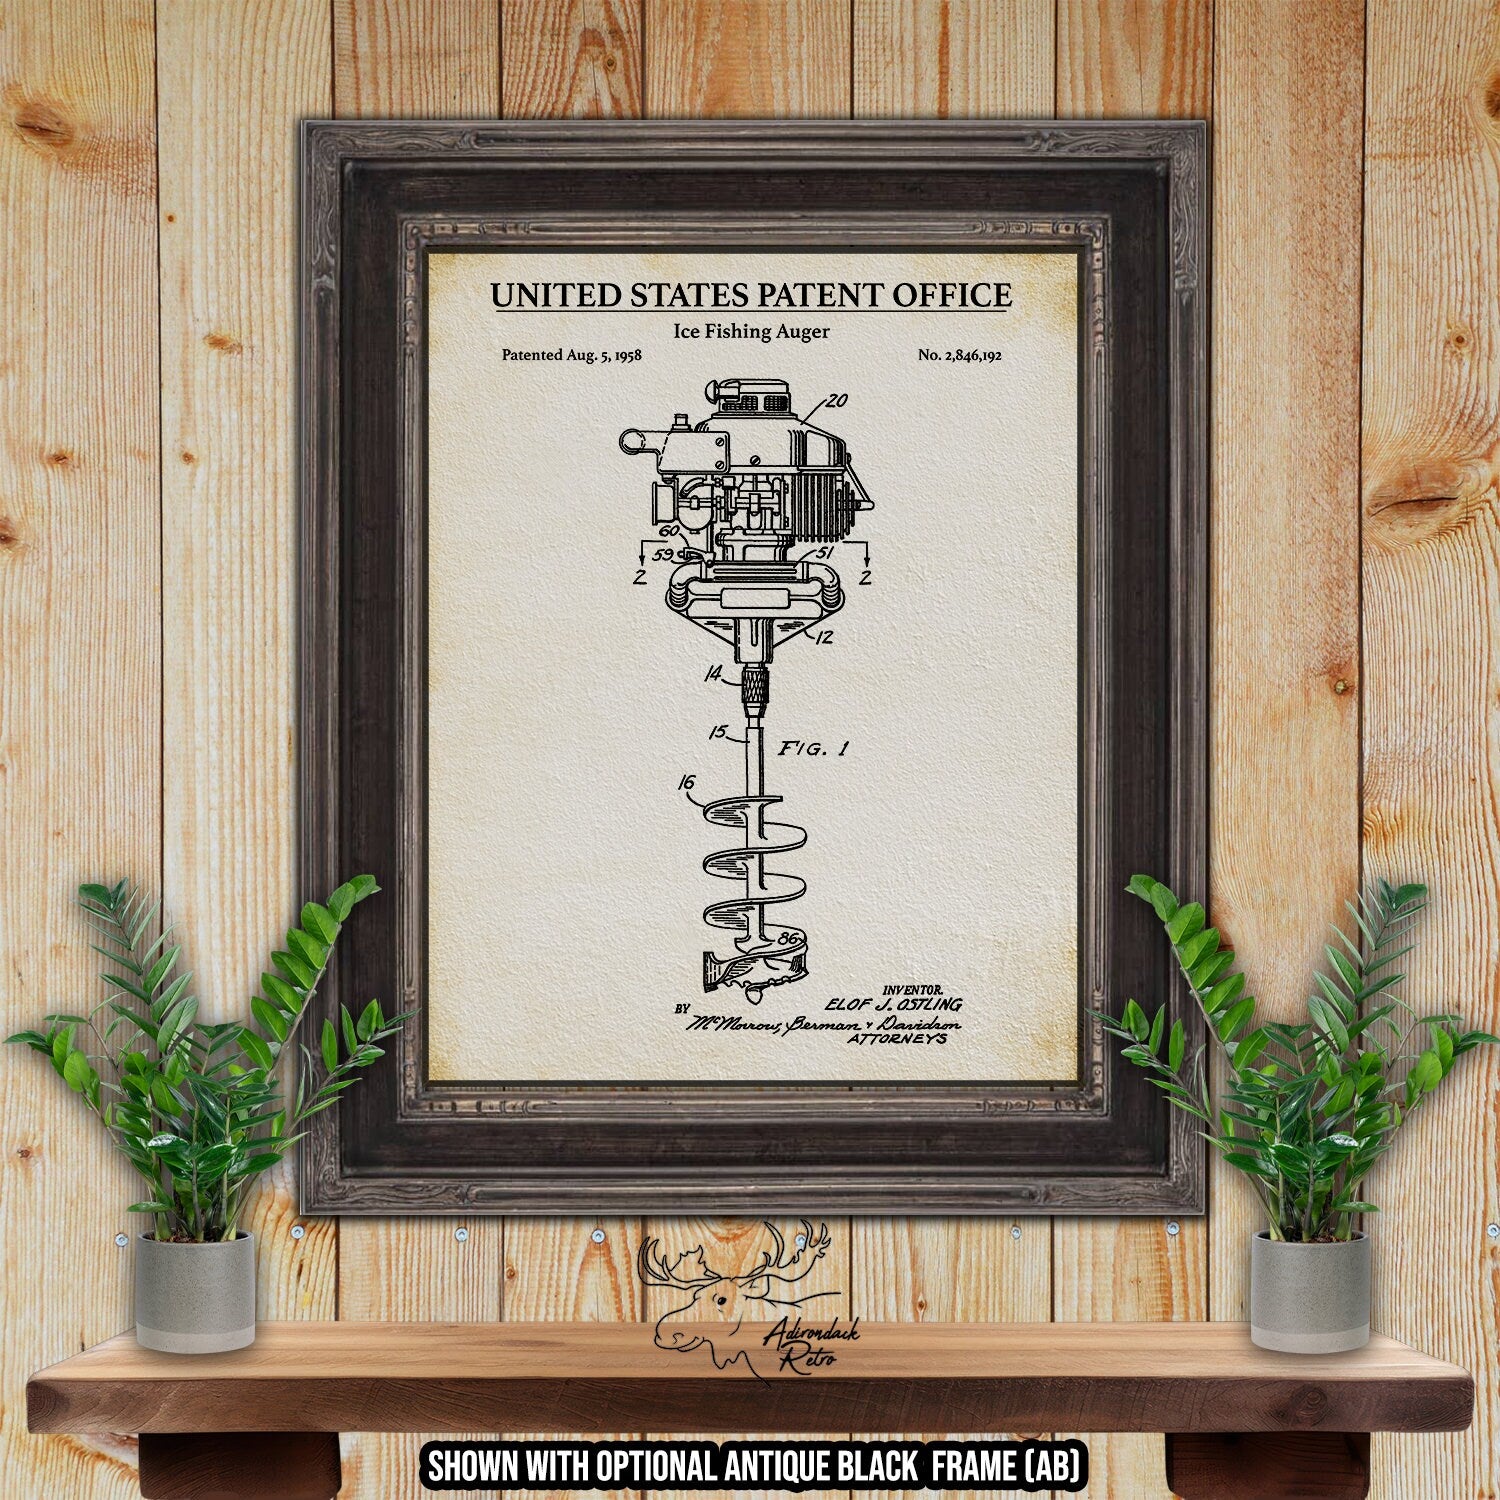 Ice Fishing Auger Patent Print - 1958 Ice Fishing Gear Invention at Adirondack Retro